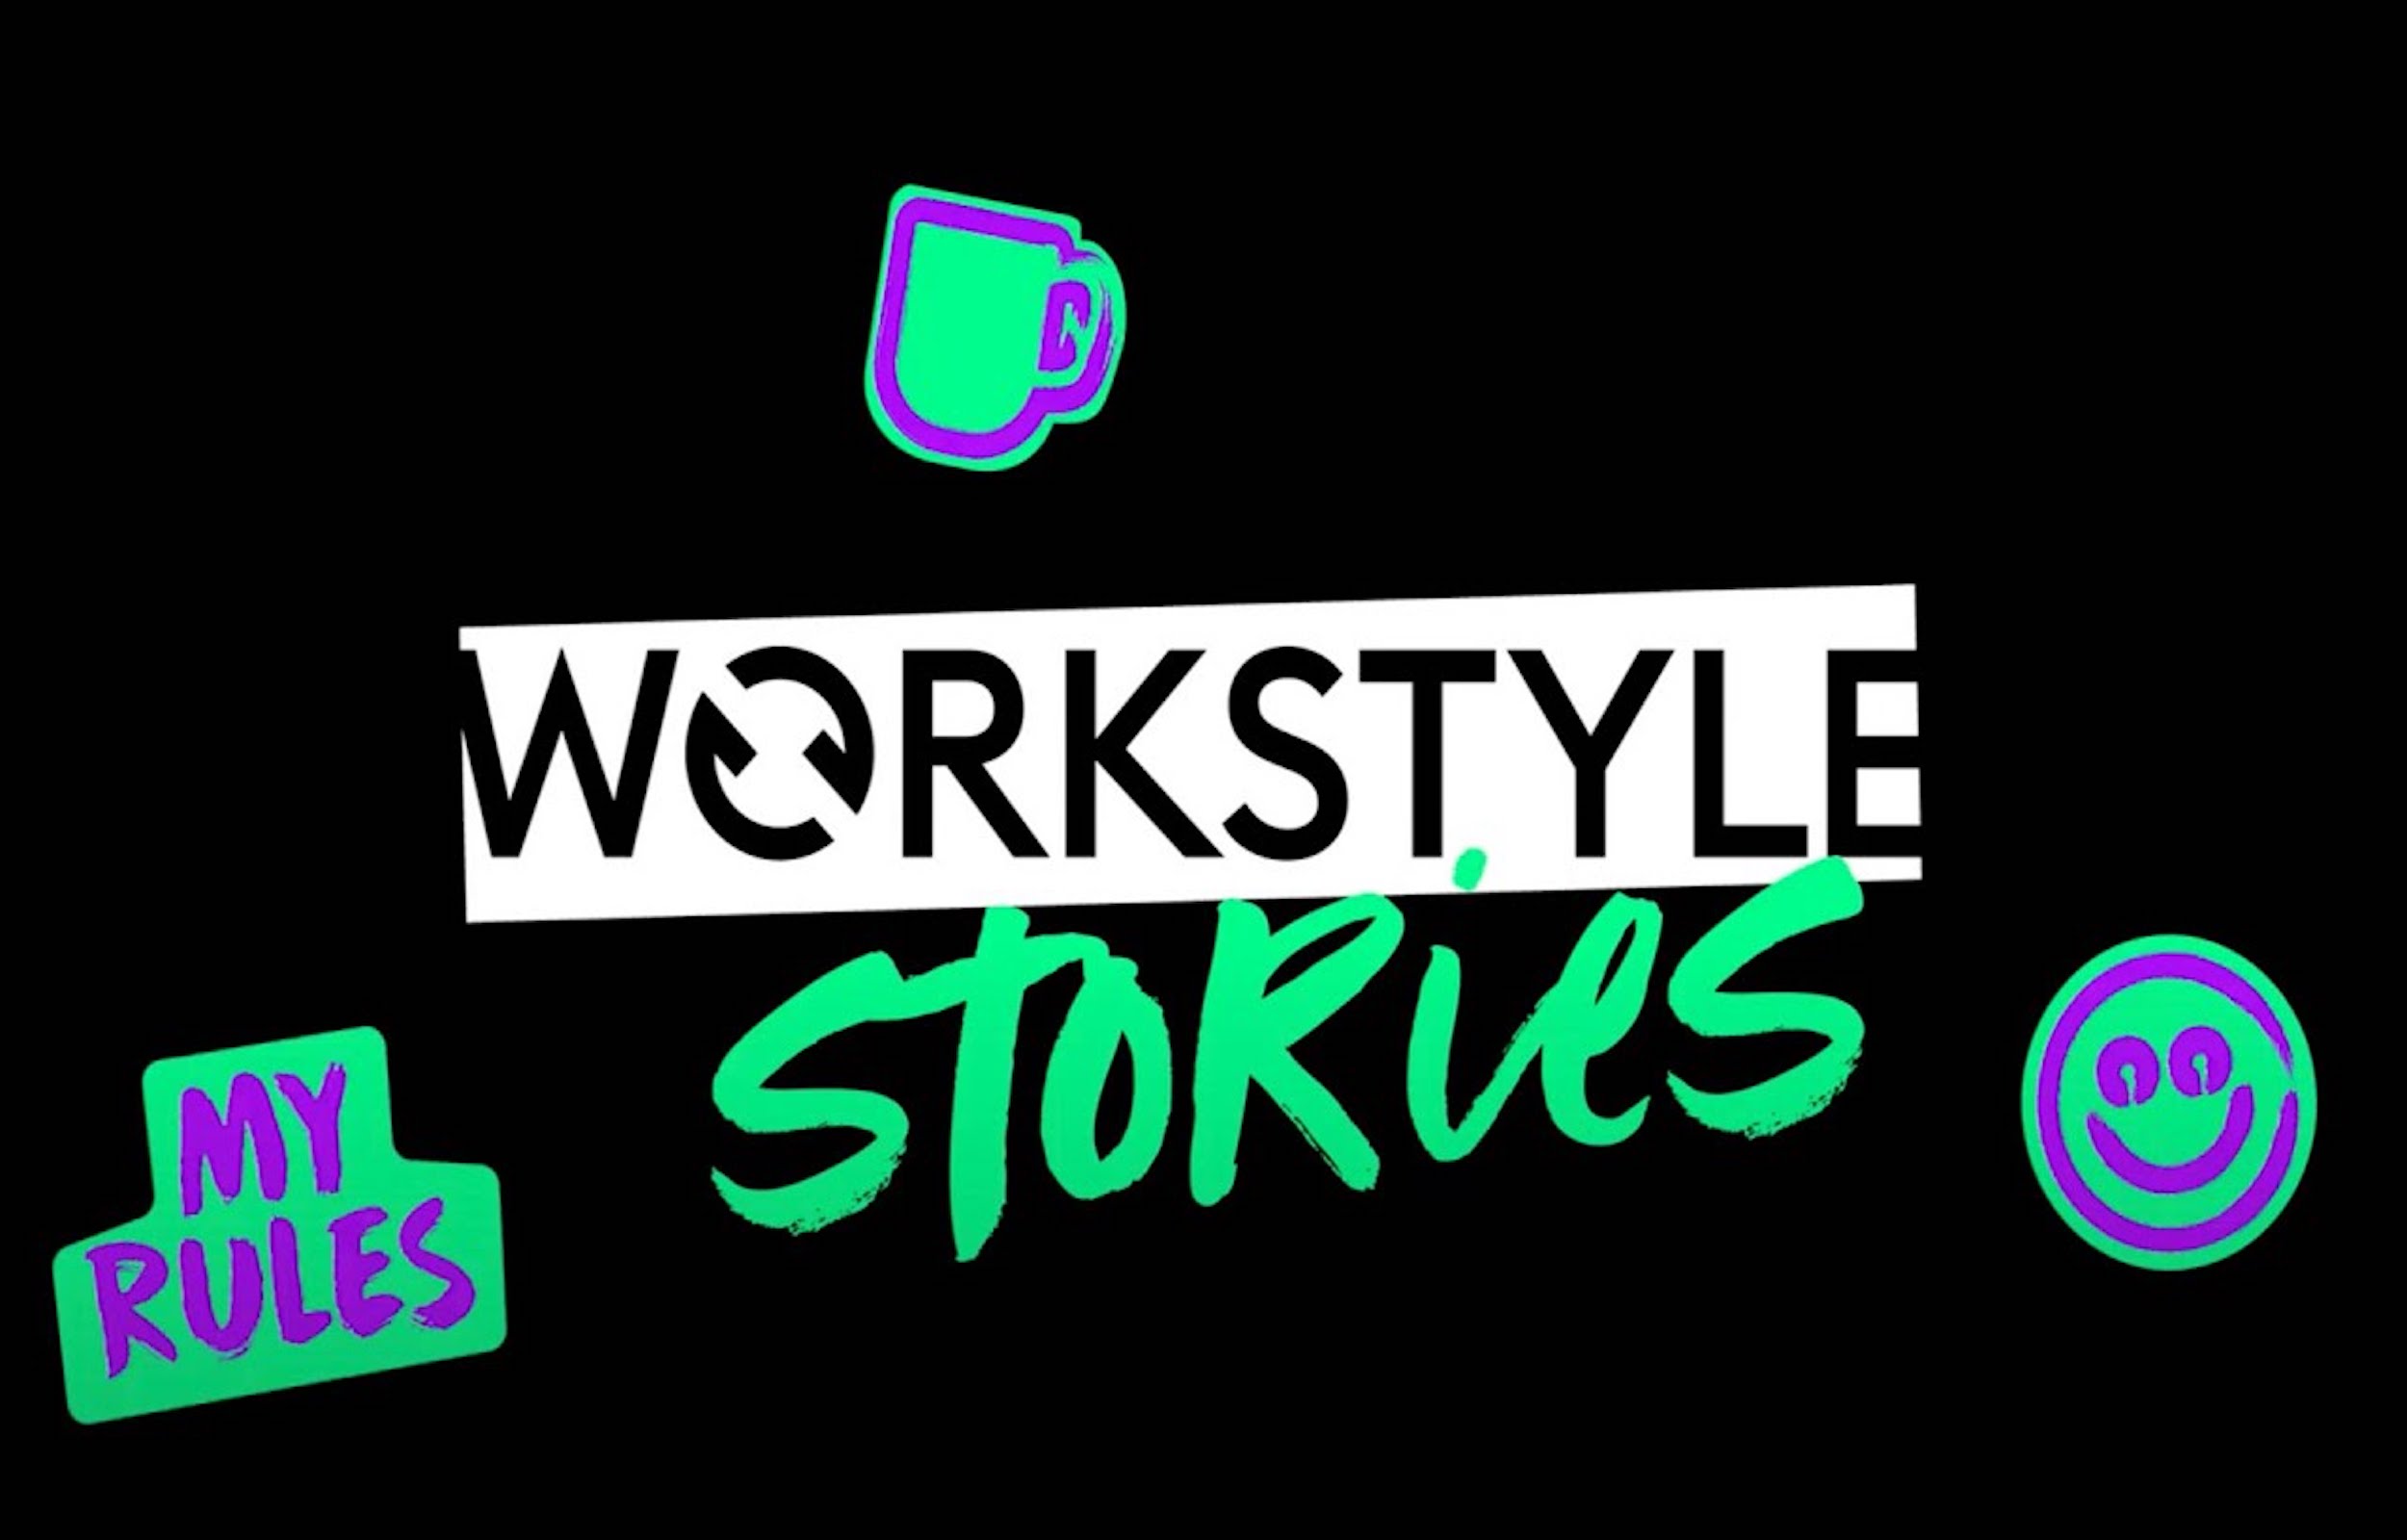 workstyle stories